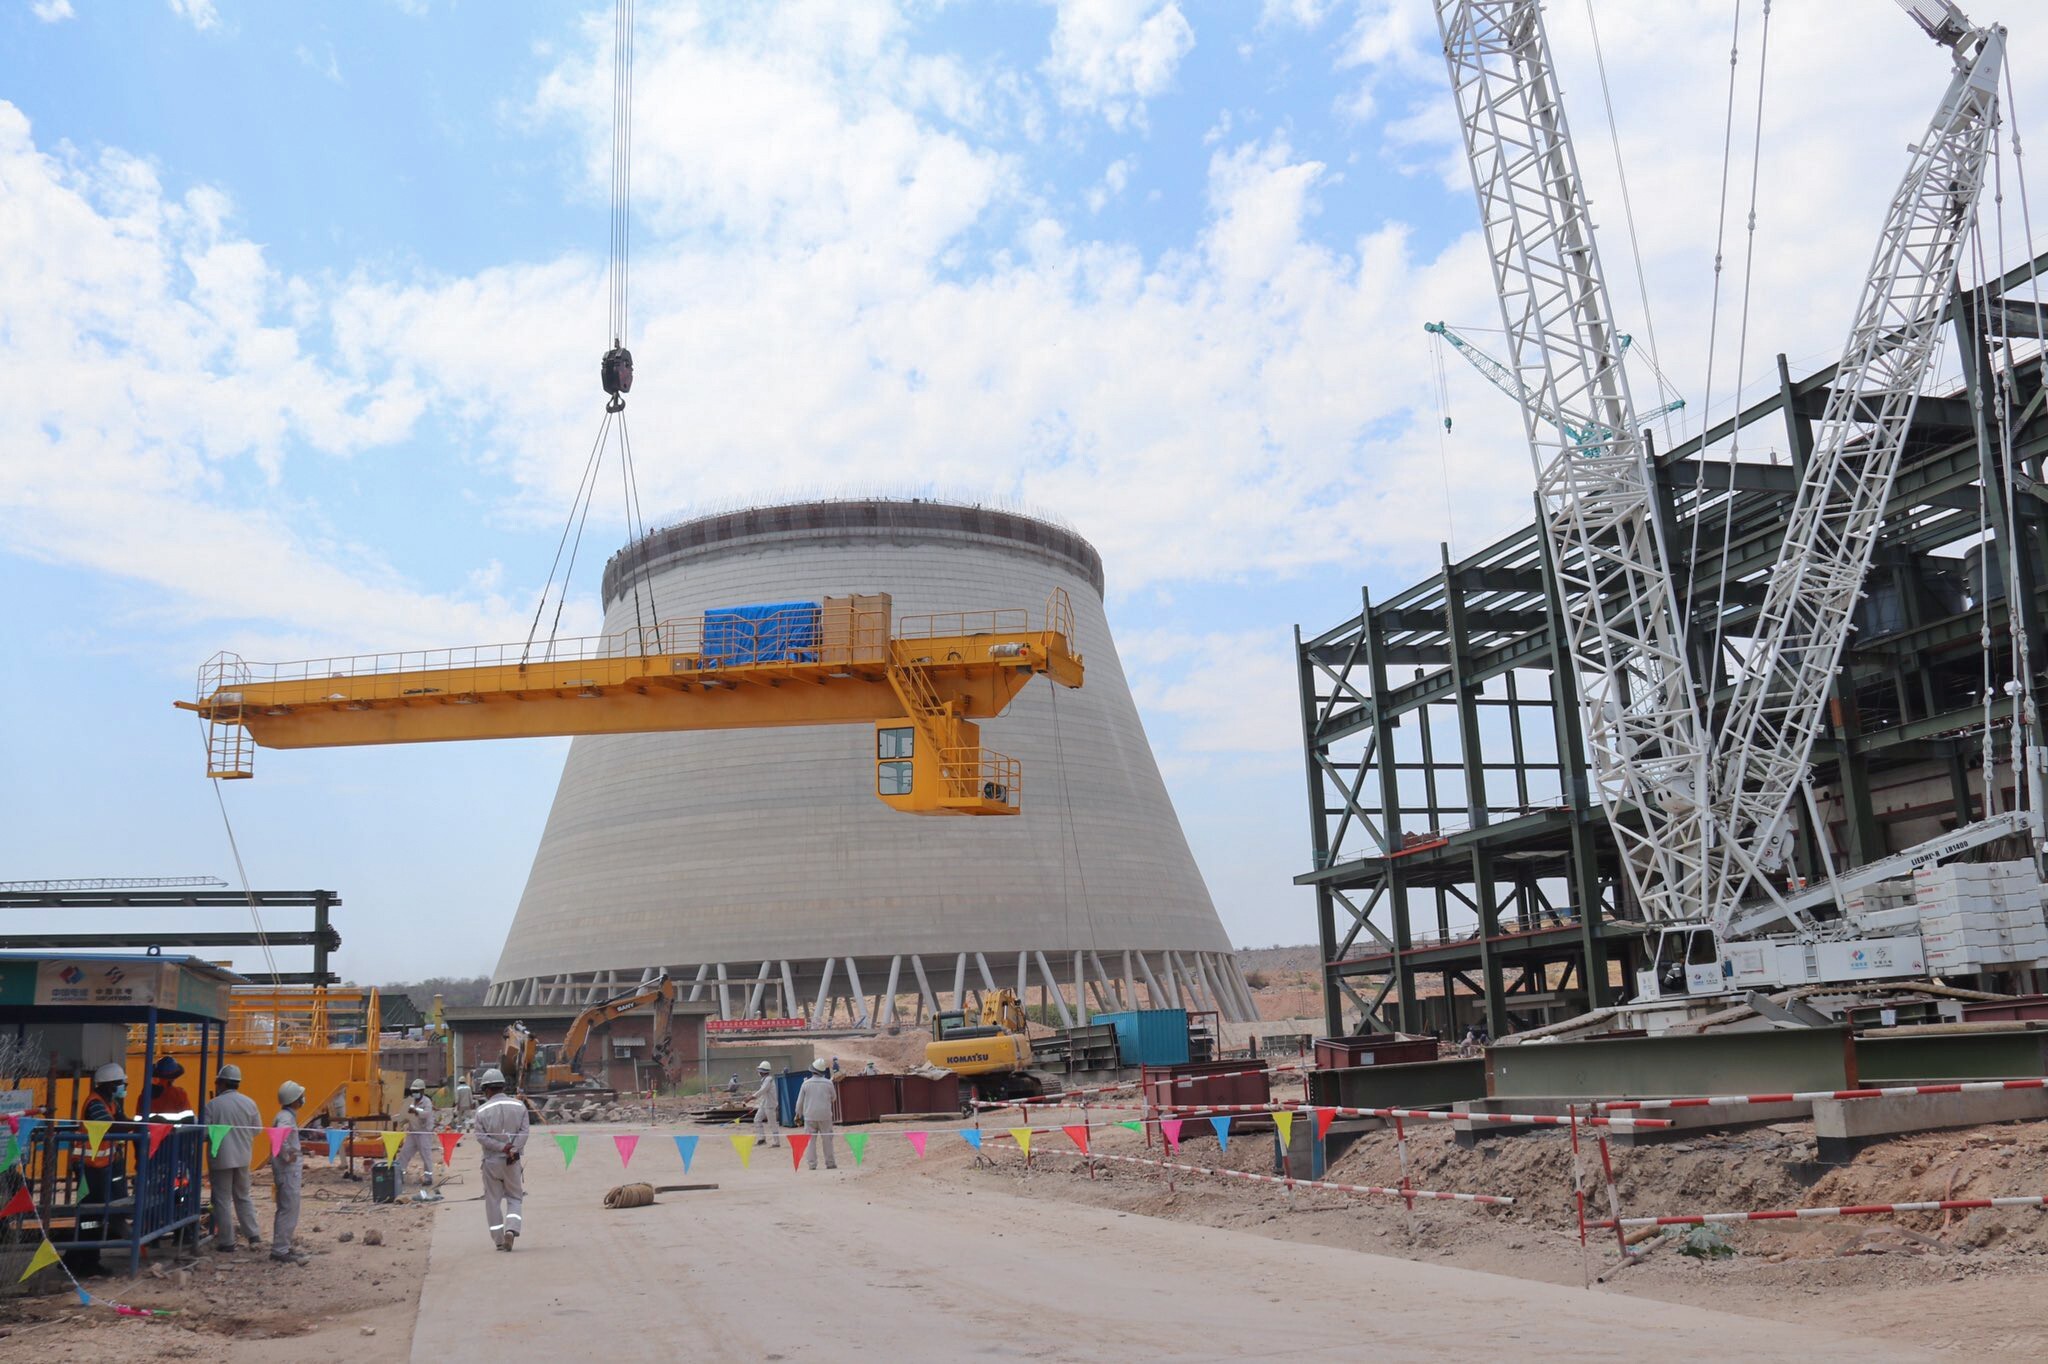 A bridge crane is installed at the US$1.4 billion coal-fired Hwange Thermal Power Station in Zimbabwe. Although Chinese development lending has helped increase global energy capacity, 64 per cent of the plants it has financed are in the carbon-intensive coal sector. Photo: Handout